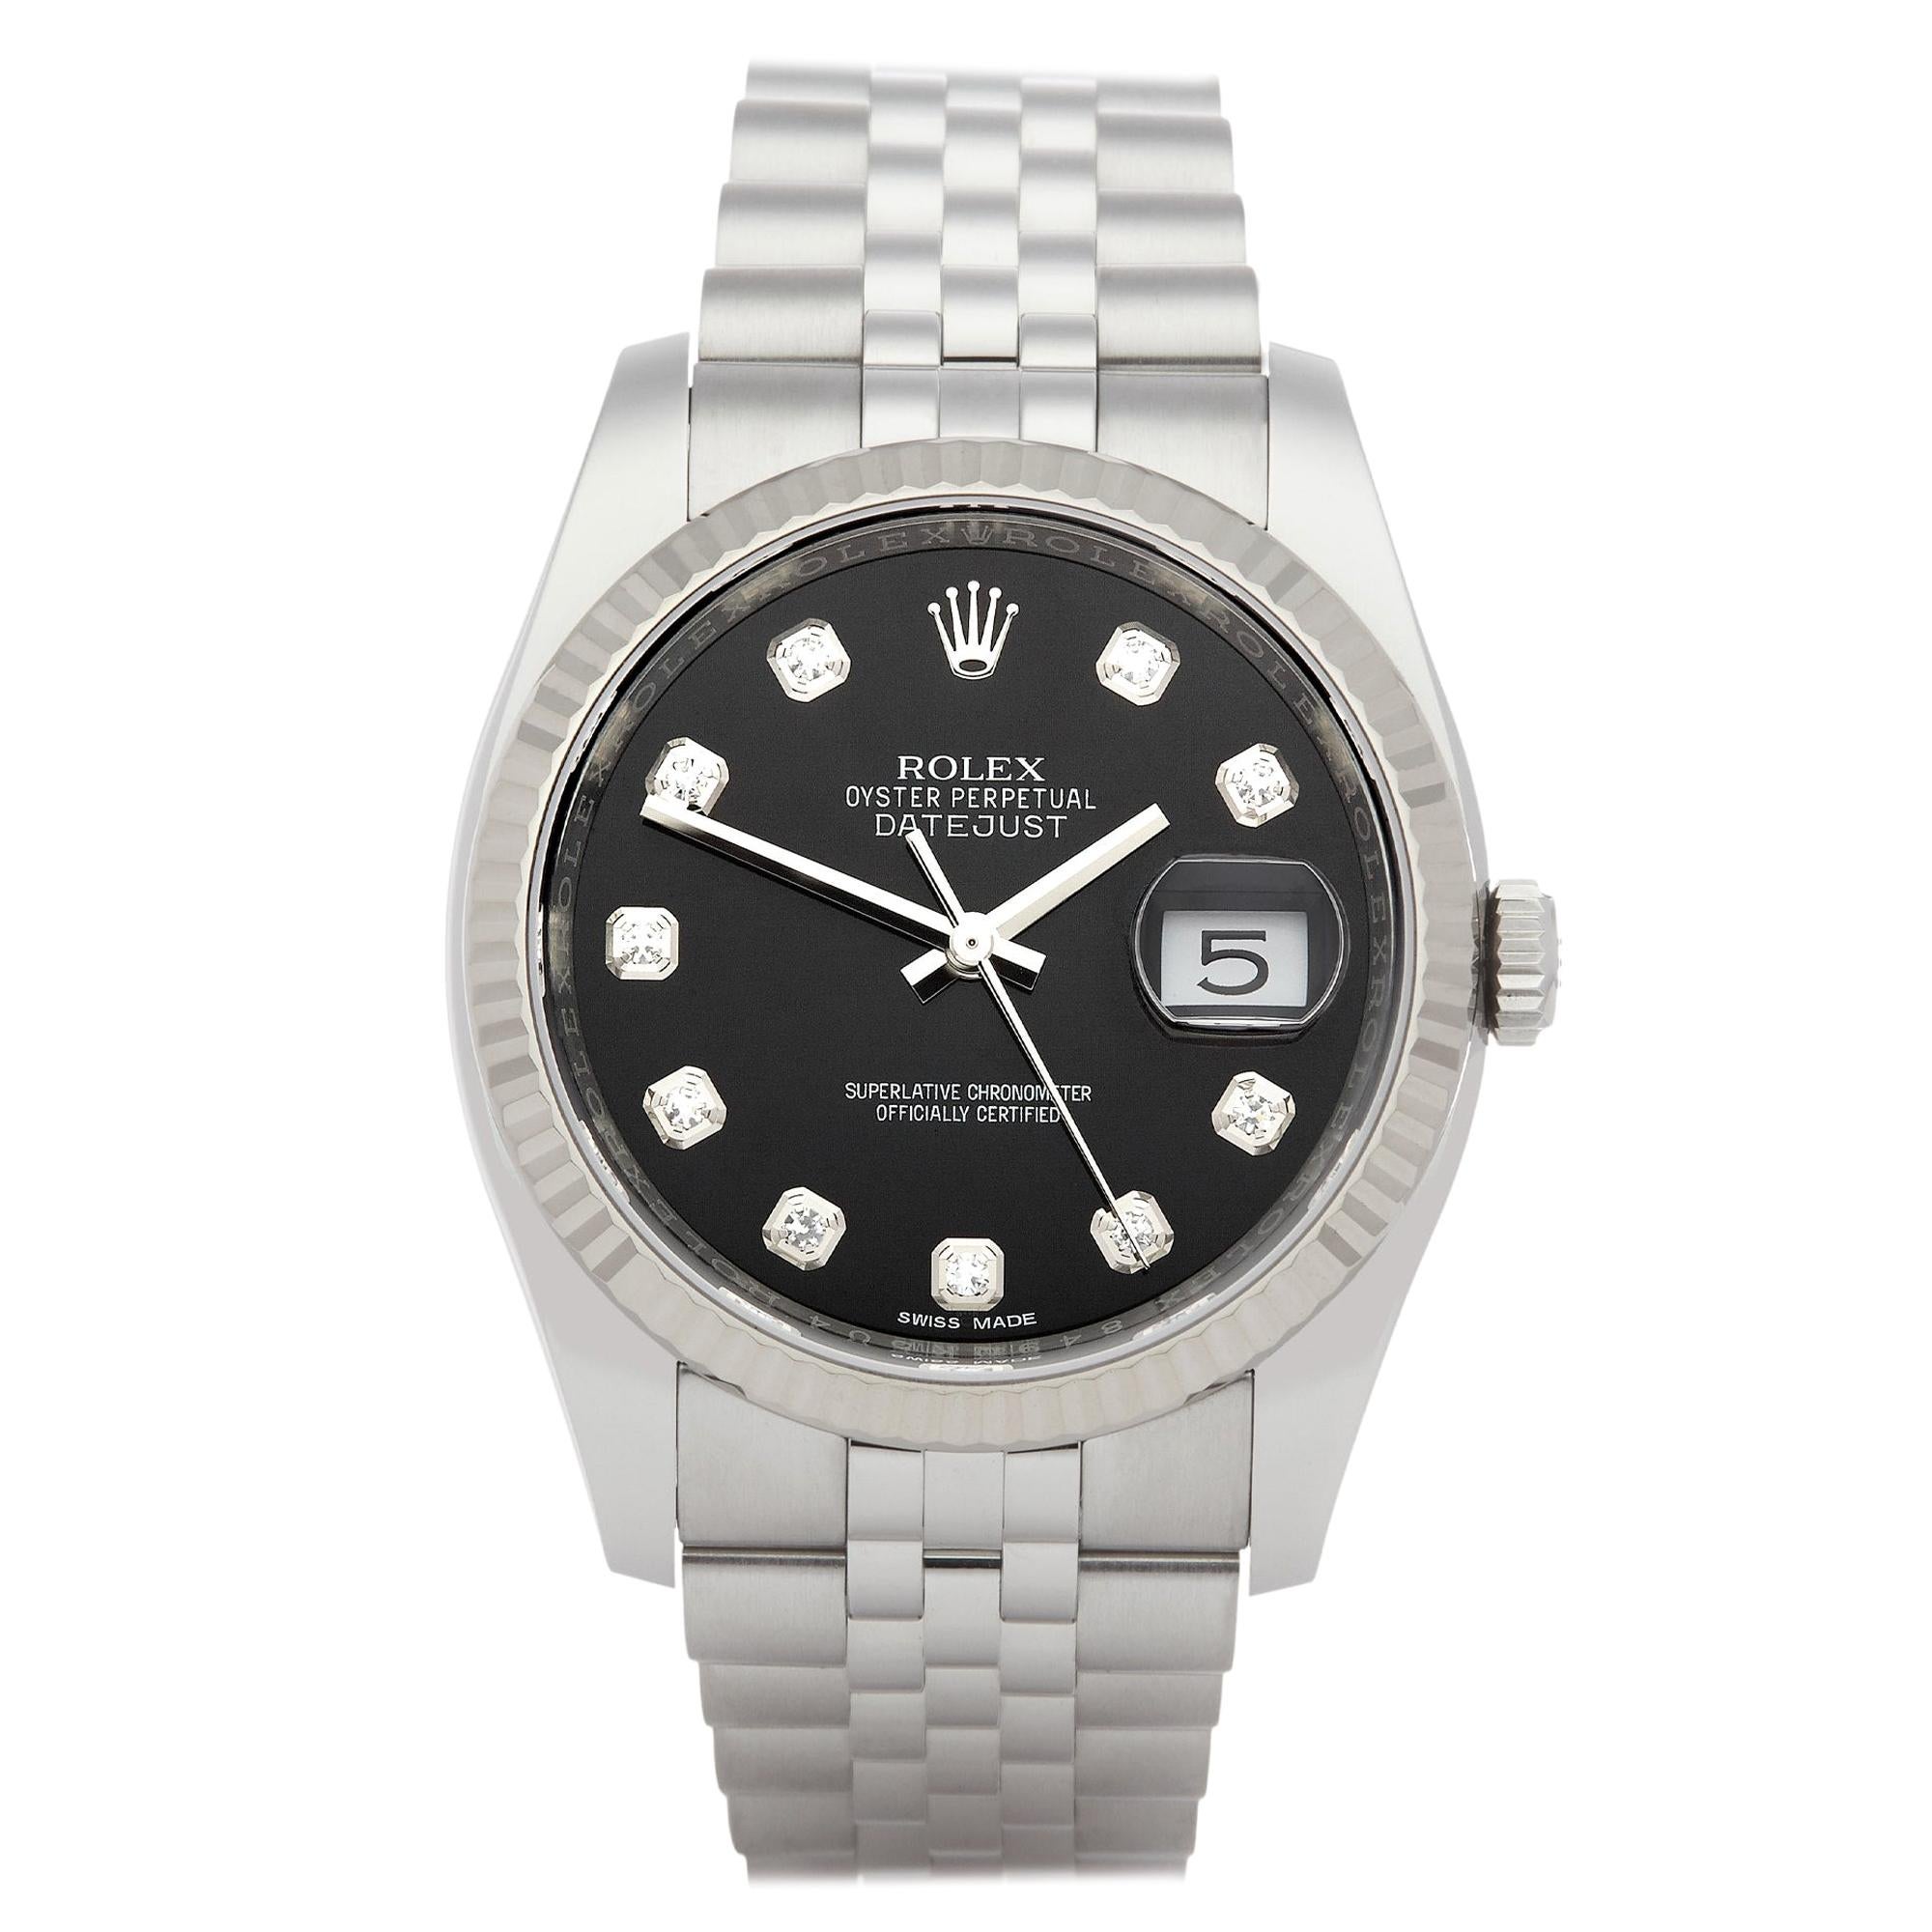 Rolex Oyster Perpetual 36 116234 Men's Stainless Steel Diamond Watch